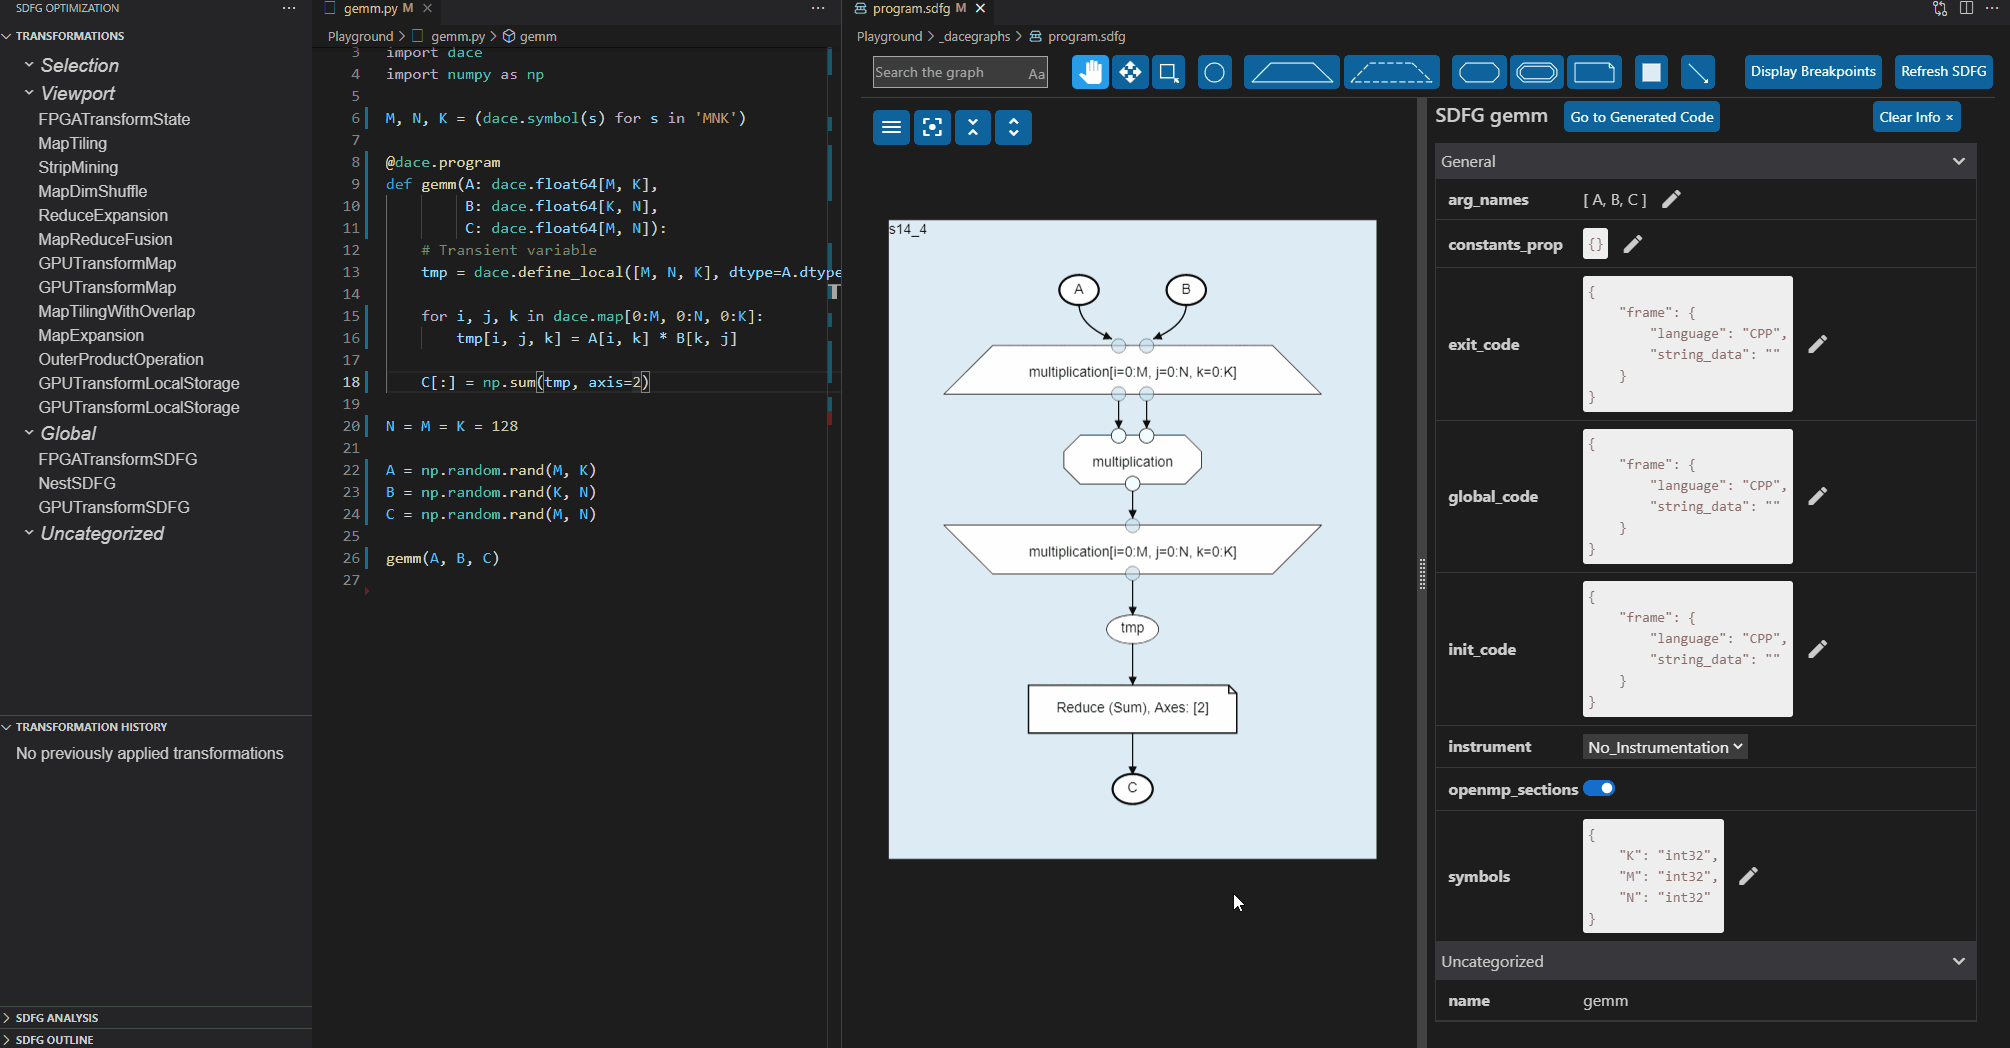 A demonstration of the VS Code UI.